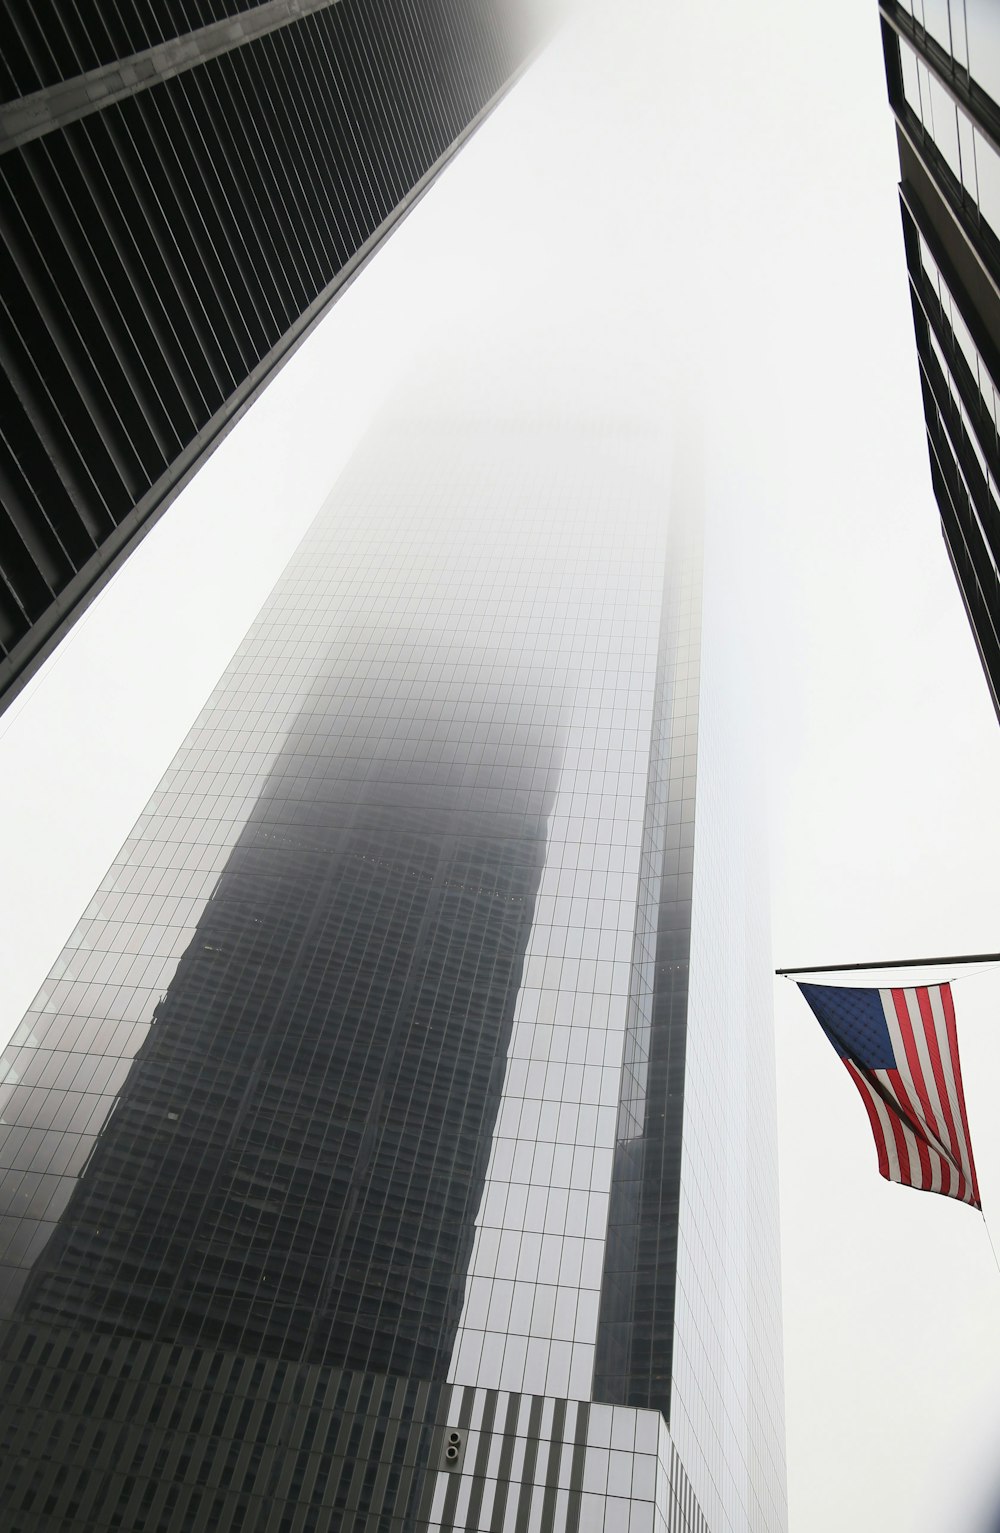 a tall building with two american flags flying in front of it